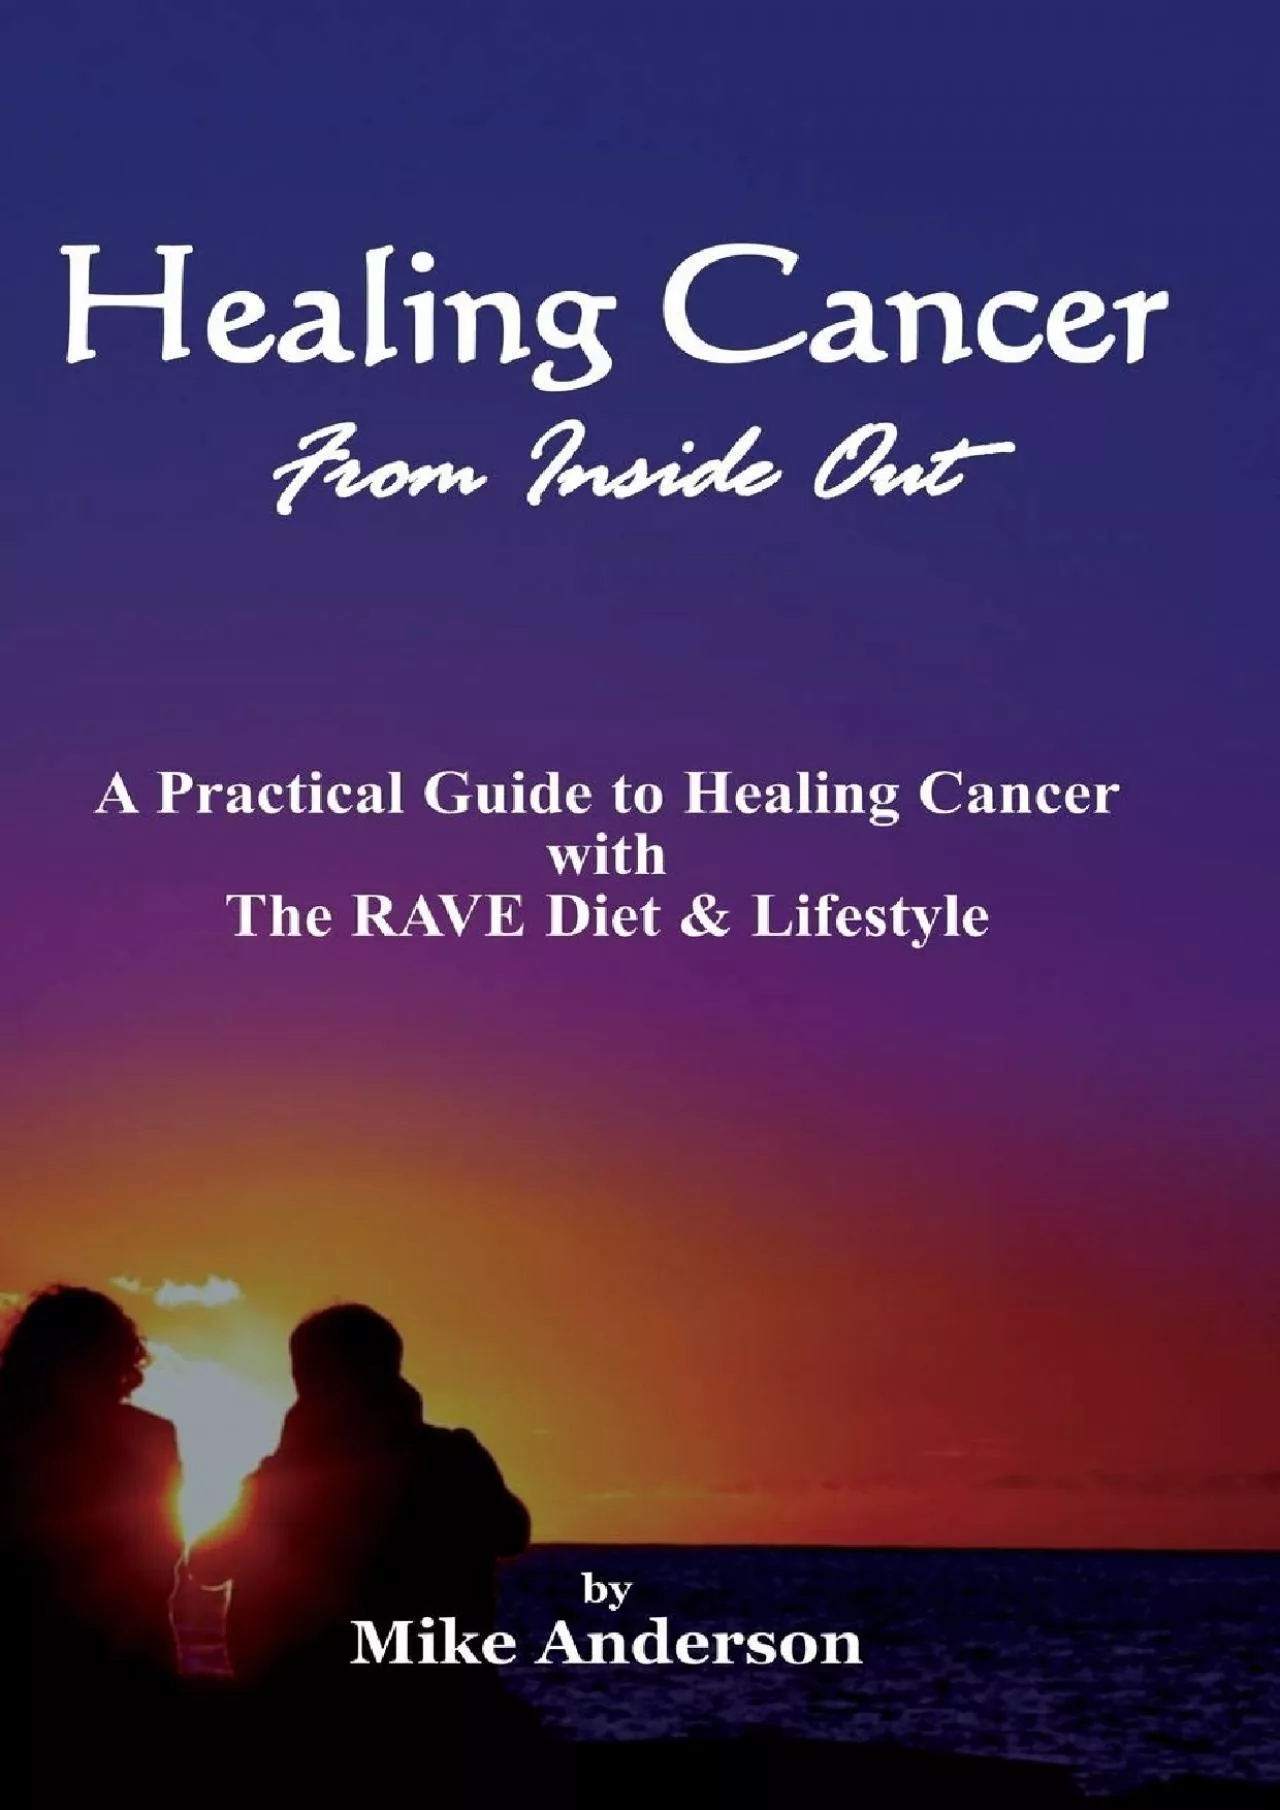 (DOWNLOAD)-Healing Cancer from Inside Out: A Practical Guide to Healing Cancer With the